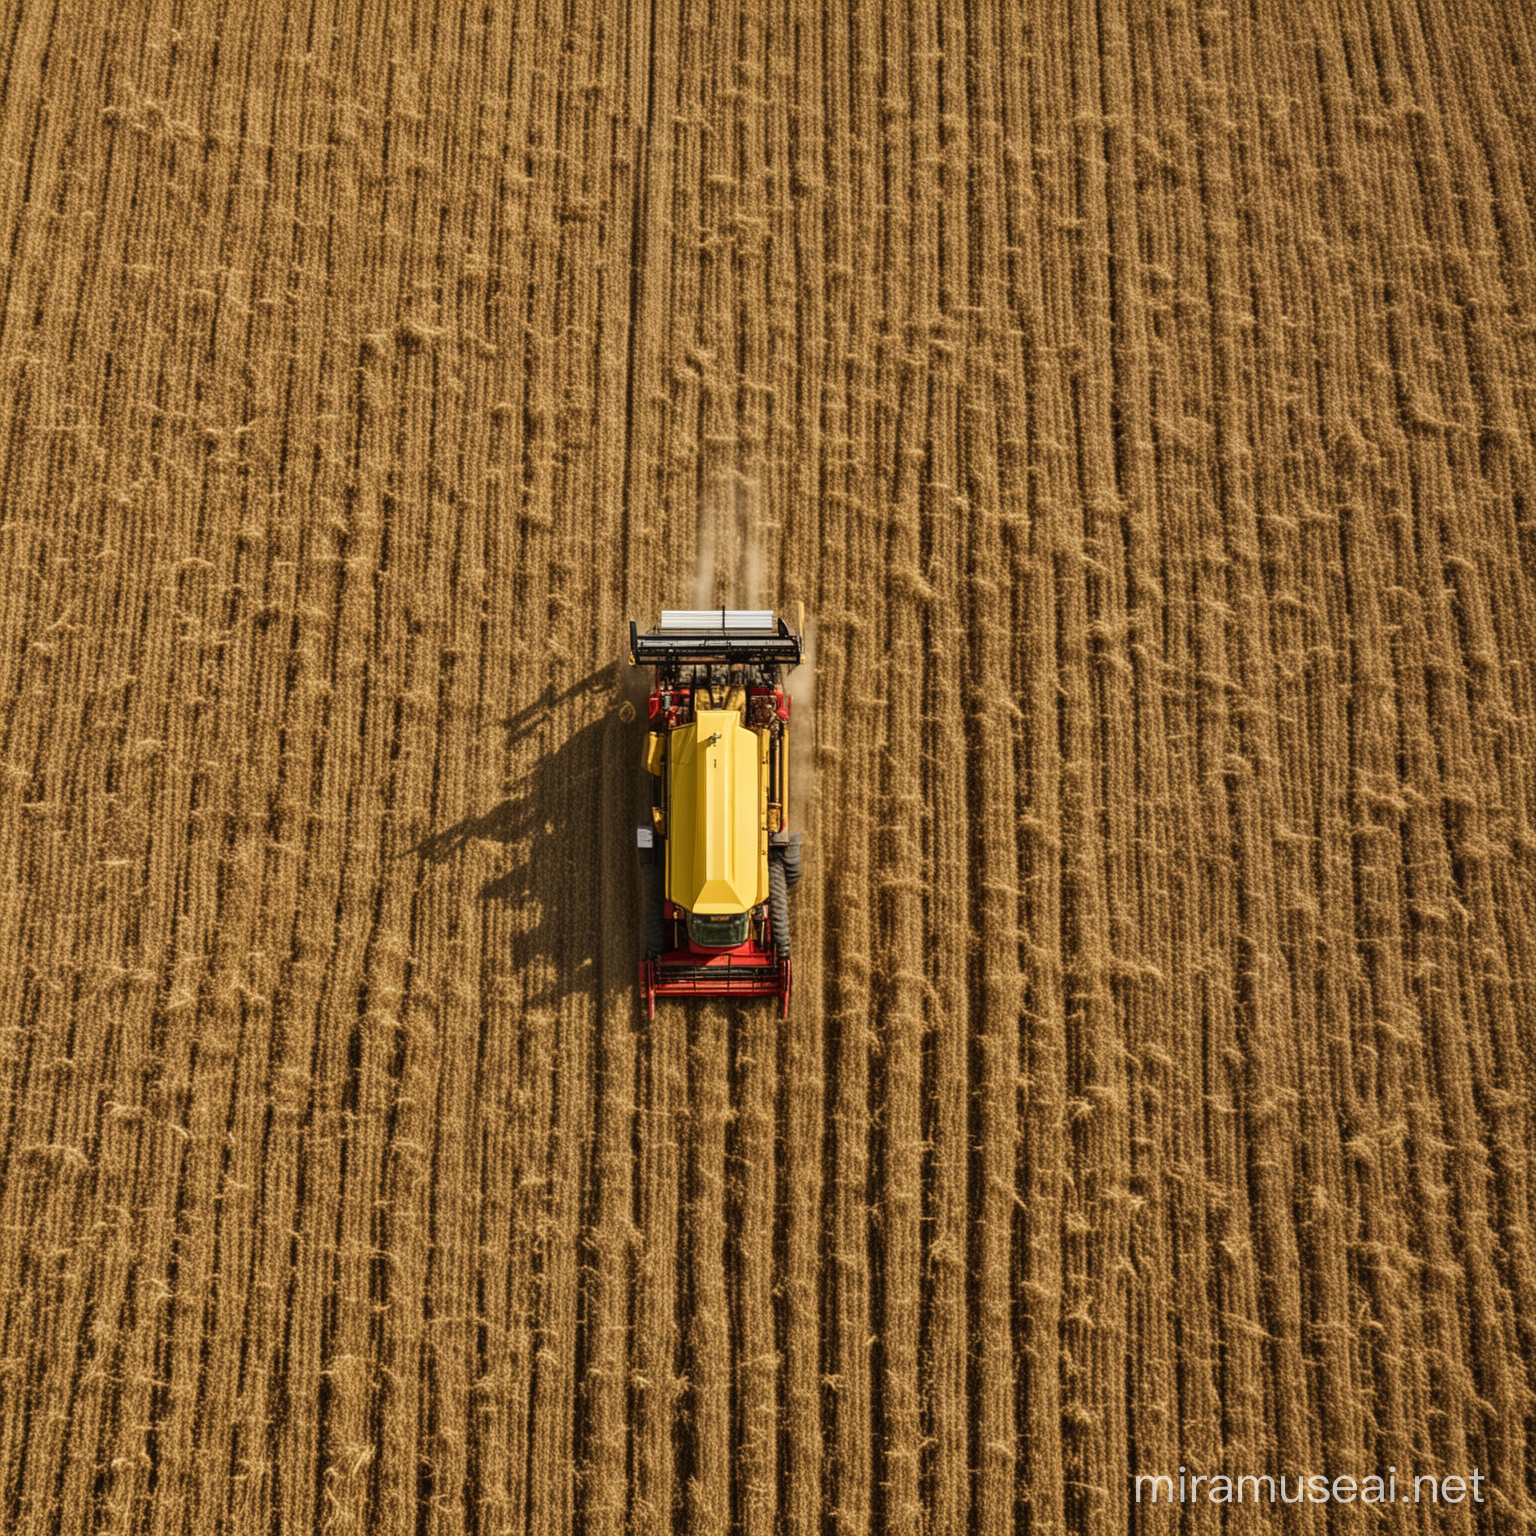 From the expansive vantage point of the sky, the aerial view captures the impressive sight of a combined harvester in action, traversing a vast cornfield with precision and efficiency. The golden waves of cornstalks stretch endlessly across the landscape, creating a mesmerizing pattern that unfolds beneath the behemoth machine.

The combined harvester, a marvel of modern agricultural technology, moves methodically through the field, its mechanical arms extending and retracting as it gathers the ripe corn with remarkable speed and precision. The rhythmic hum of its engines fills the air, blending harmoniously with the rustling of the cornstalks as they sway in the breeze.

As the harvester progresses, rows of neatly trimmed cornstalks are left in its wake, a testament to the machine's efficiency and effectiveness in maximizing yield. From this aerial perspective, the sheer scale of the operation is awe-inspiring, underscoring the significance of agriculture in sustaining our communities and economies.

Against the backdrop of the sprawling cornfield, the combined harvester stands as a symbol of human ingenuity and innovation, harnessing the power of technology to feed and nourish the world. In this moment captured from above, the beauty and complexity of the agricultural landscape unfold in a mesmerizing tapestry of color, motion, and productivity.